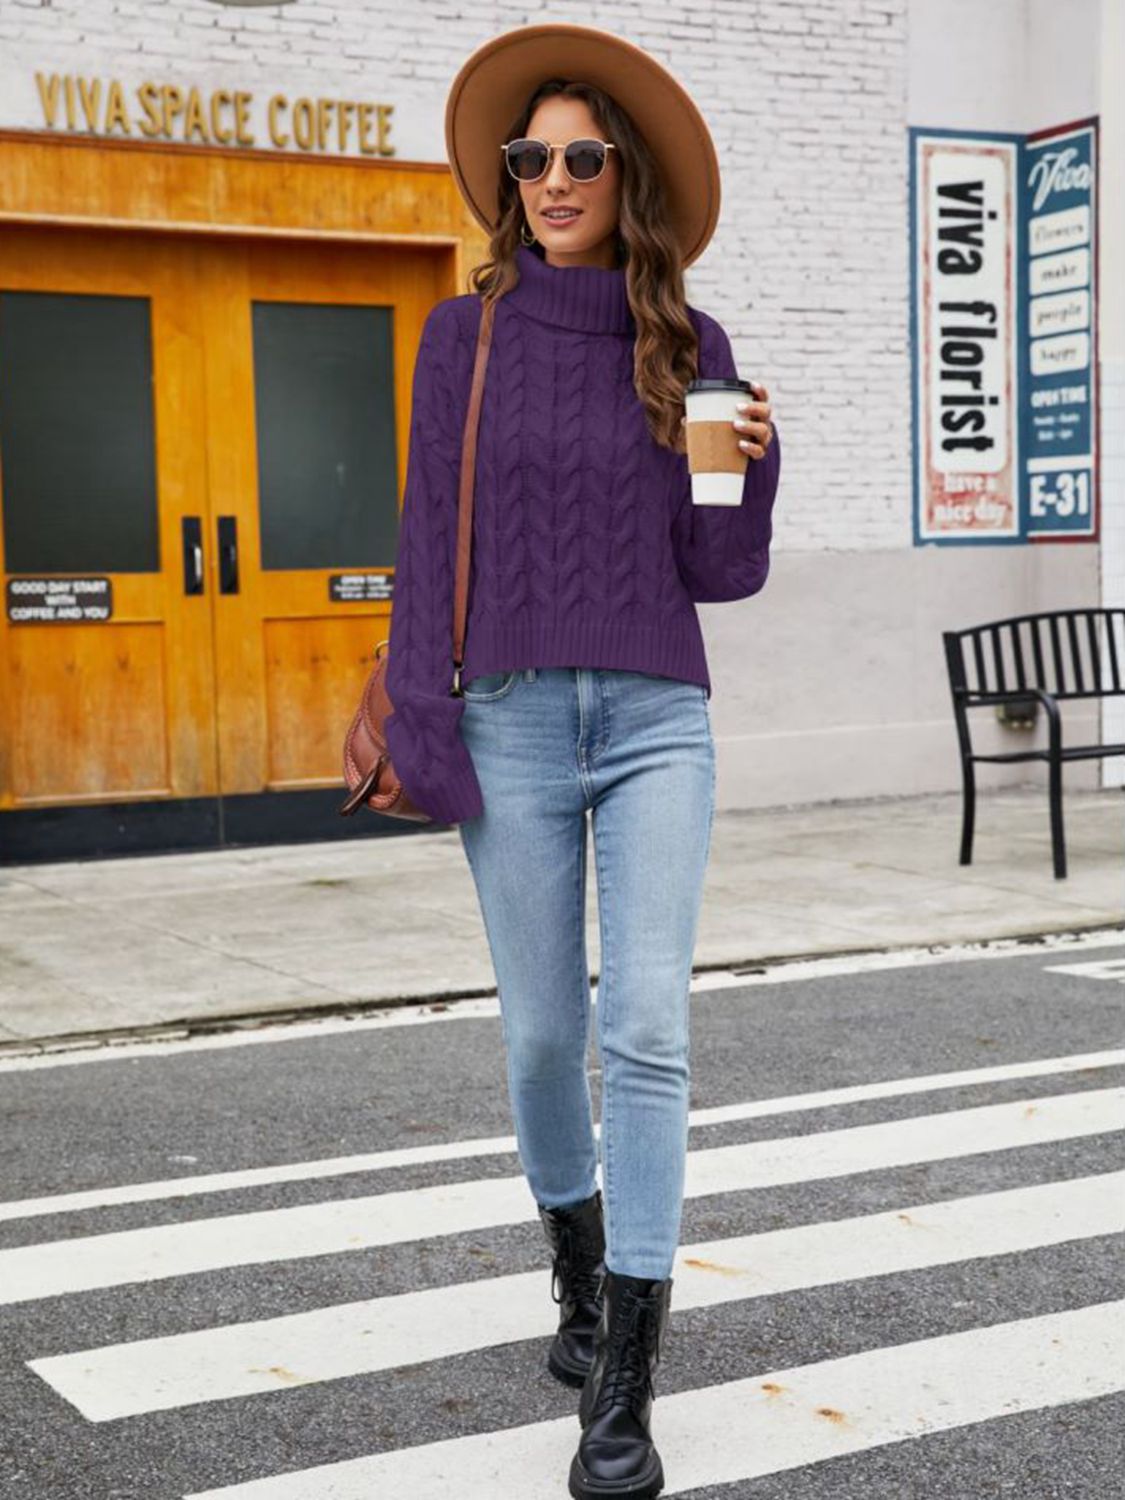 Women’s Turtle Neck Cable-Knit Sweater